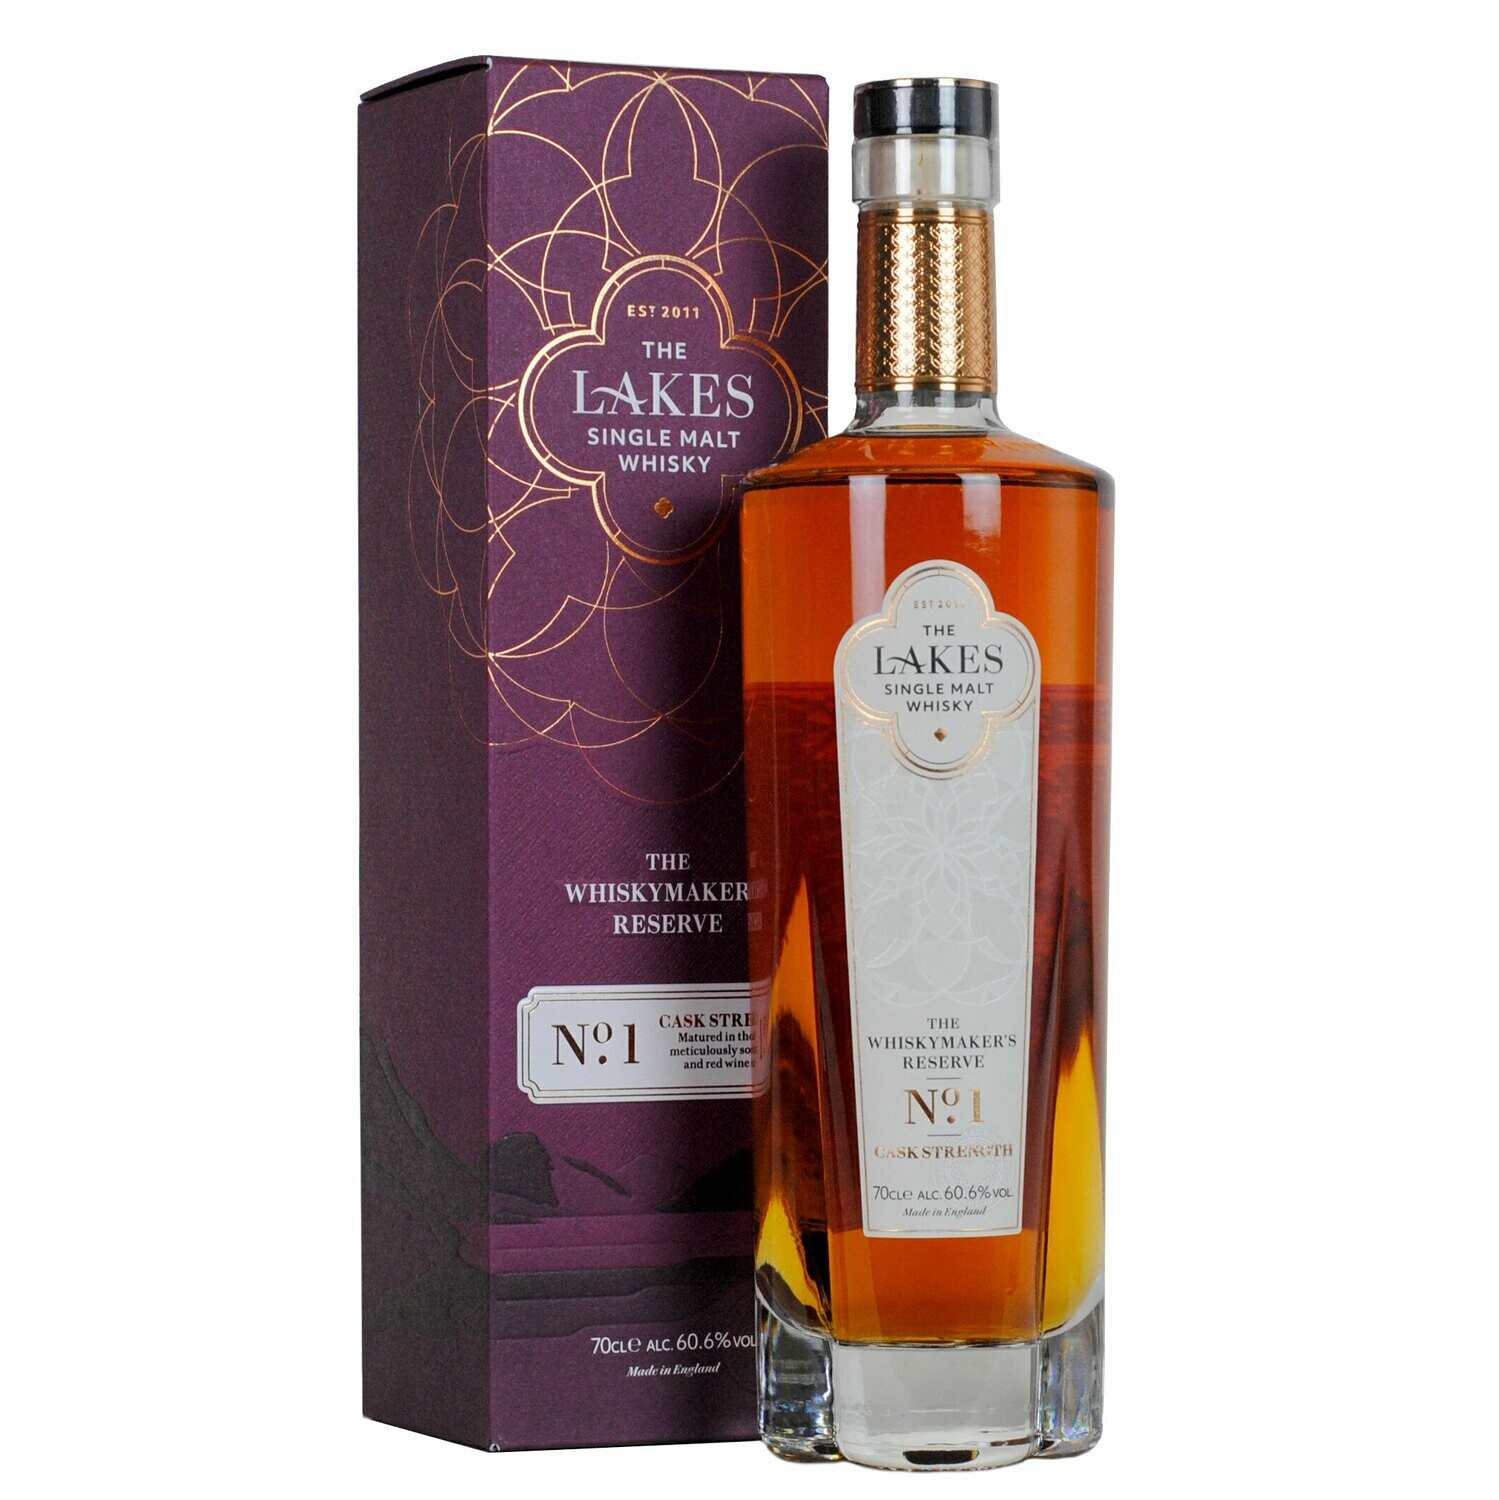 The Lakes - The Whiskymaker's Reserve No.1 60.6 "The Lakes Distillery"